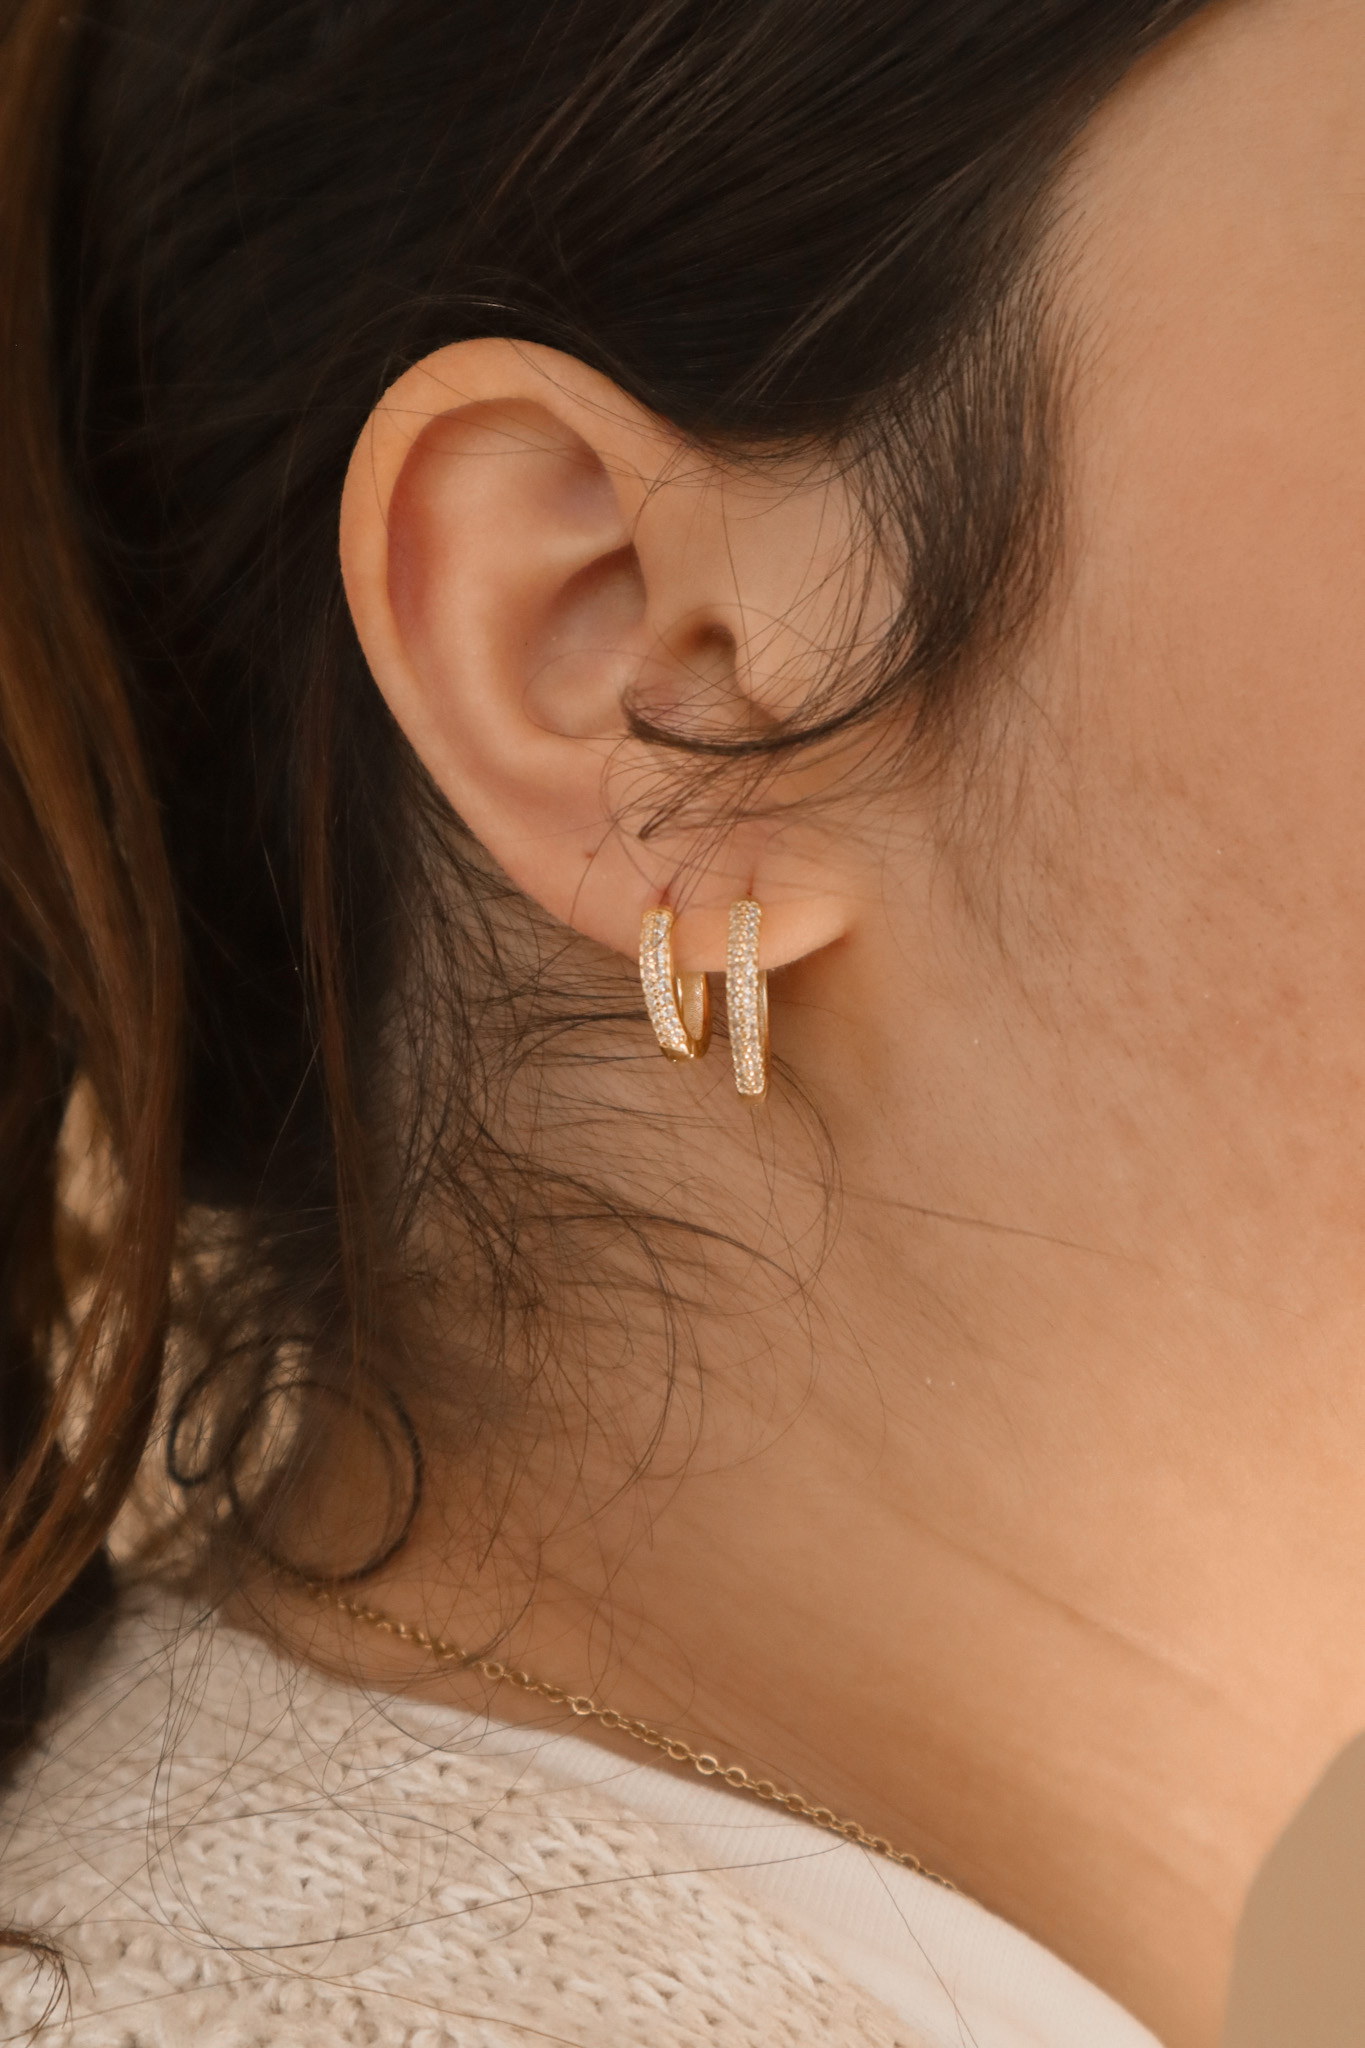 Blessed: 18mm Gold Hoop